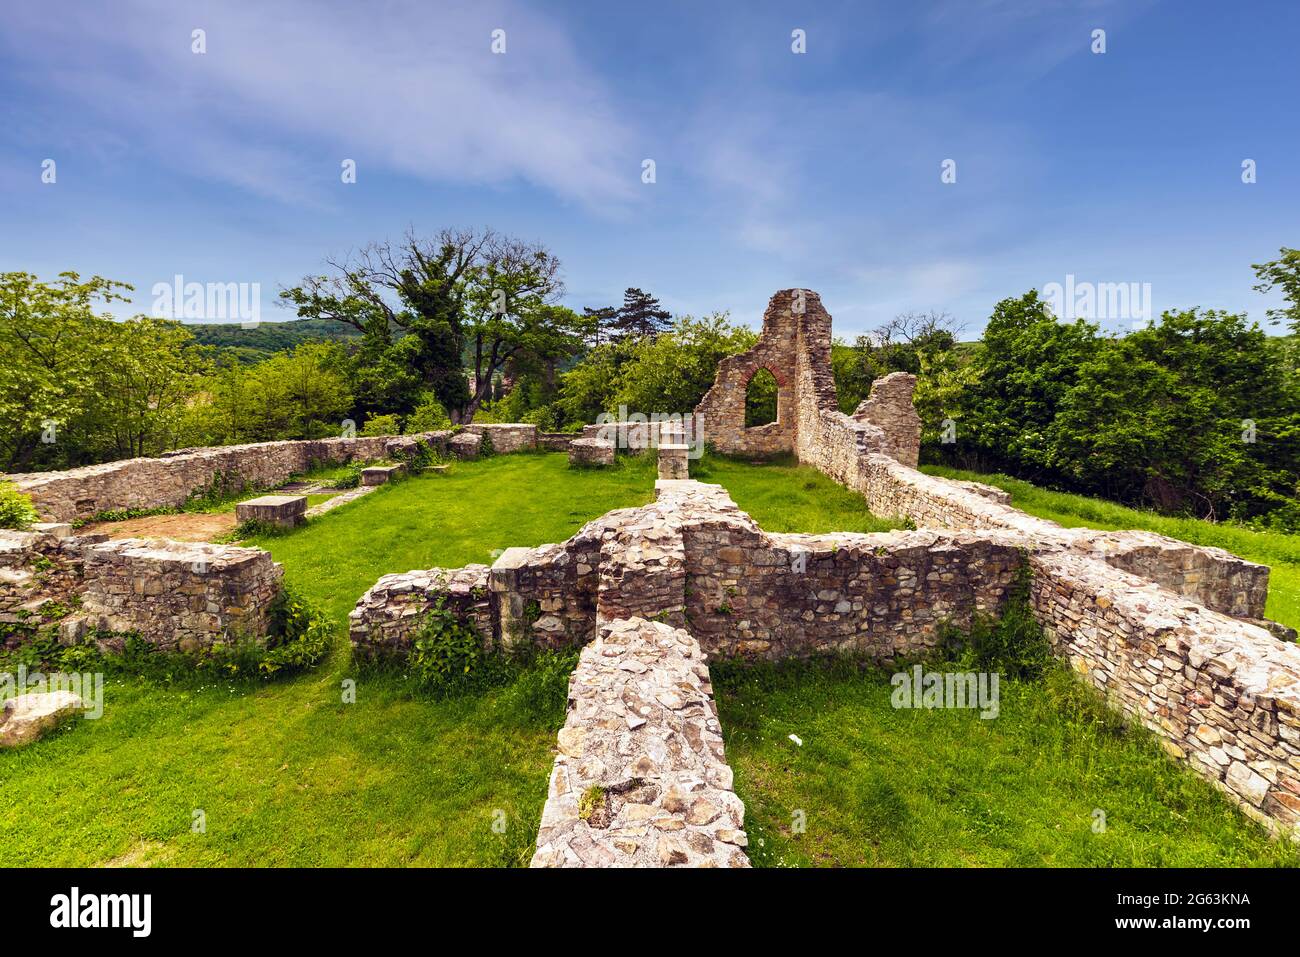 Schlosberg temple riuns in Macseknadasd Hungary. Amazoing ancient monument ruins near by Pecs city in Mecsek mountains Stock Photo